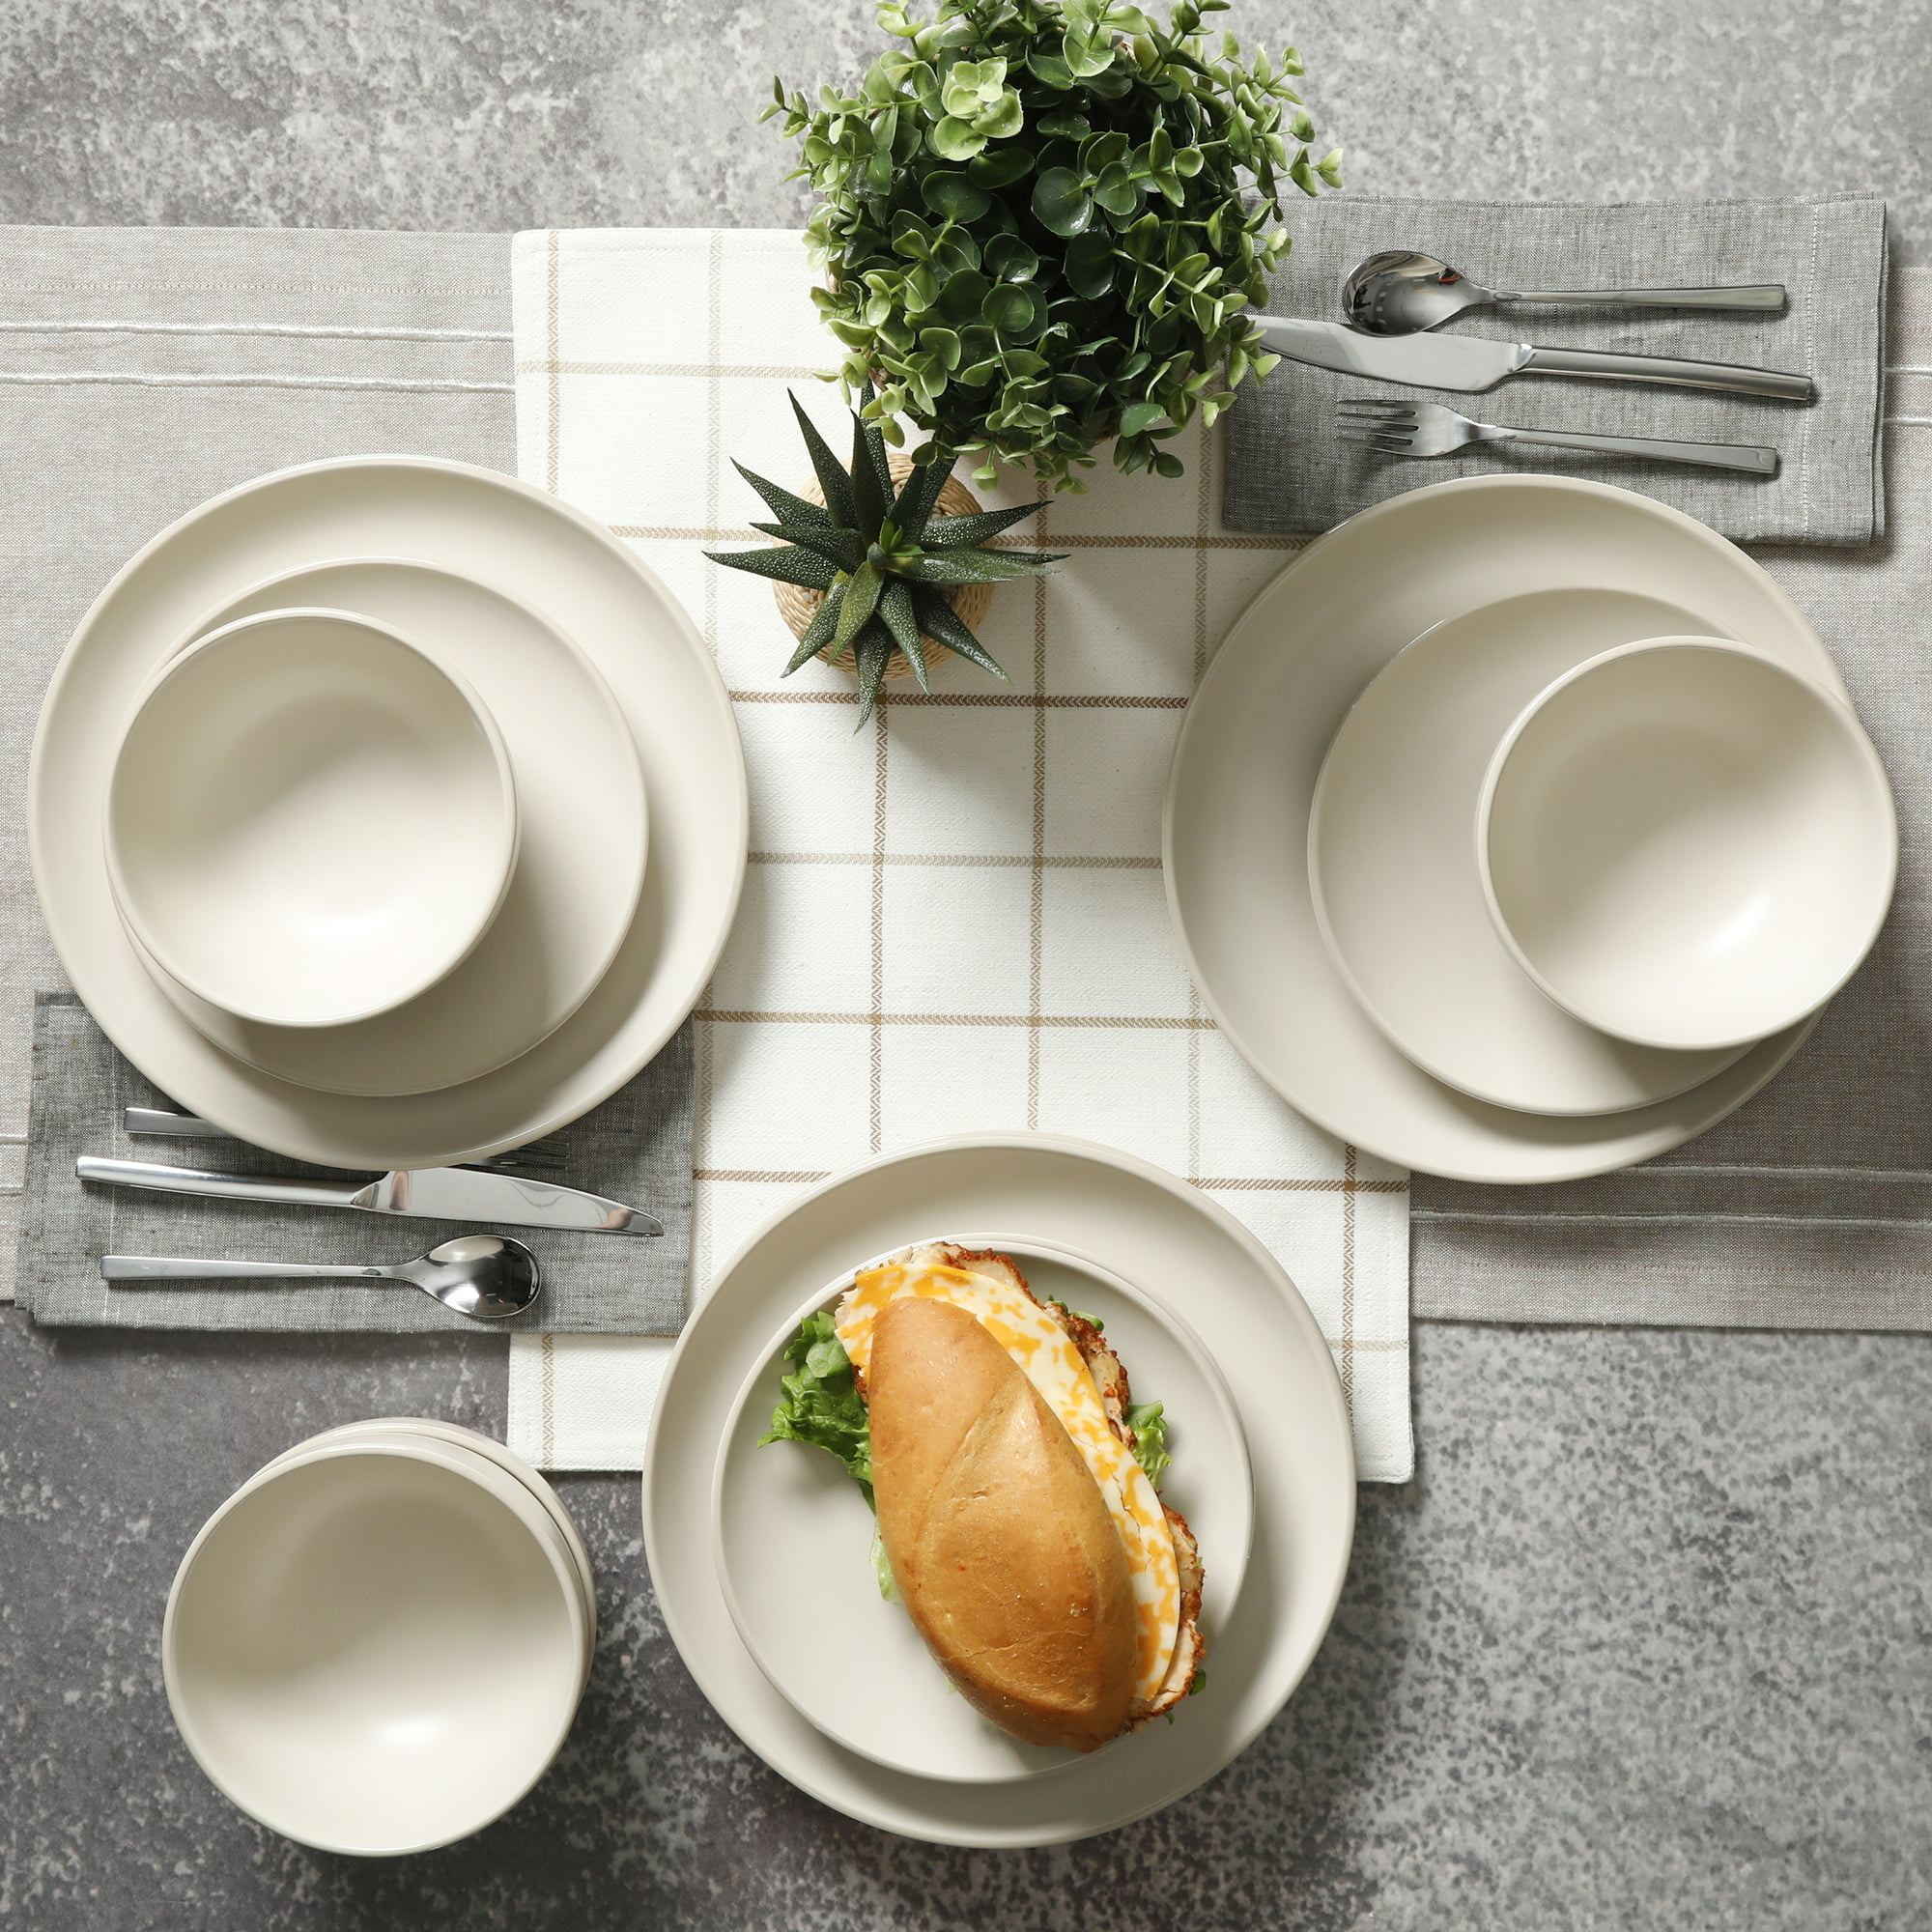 Beige dinnerware set on a table with a runner, silverware and sandwich